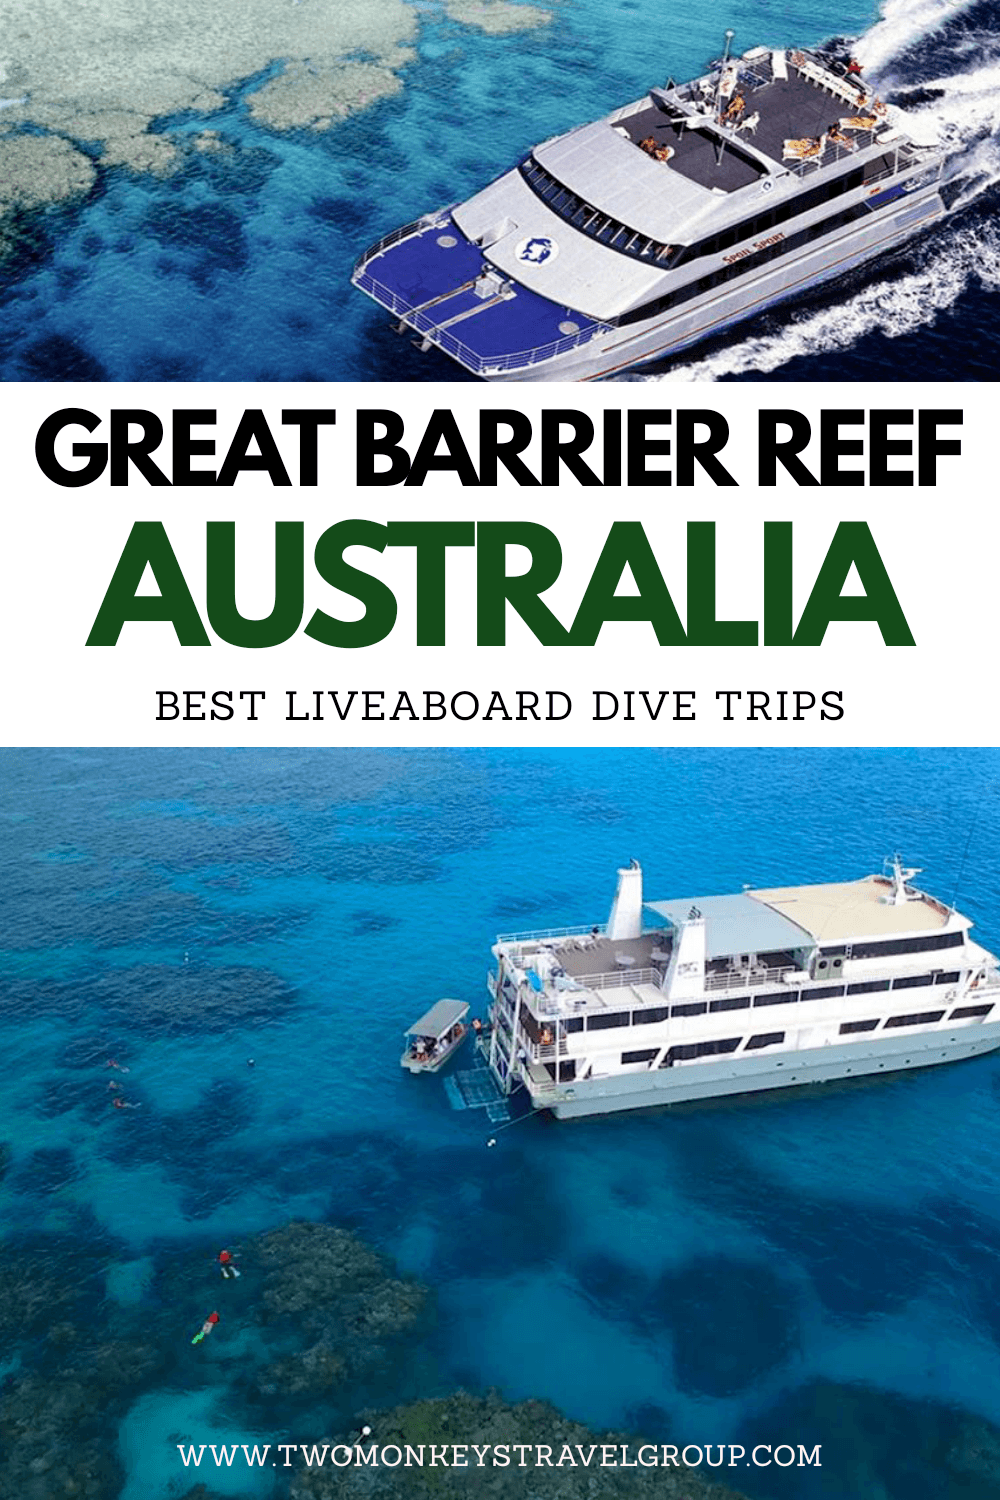 Best Liveaboard Dive Trips at the Great Barrier Reef in Australia